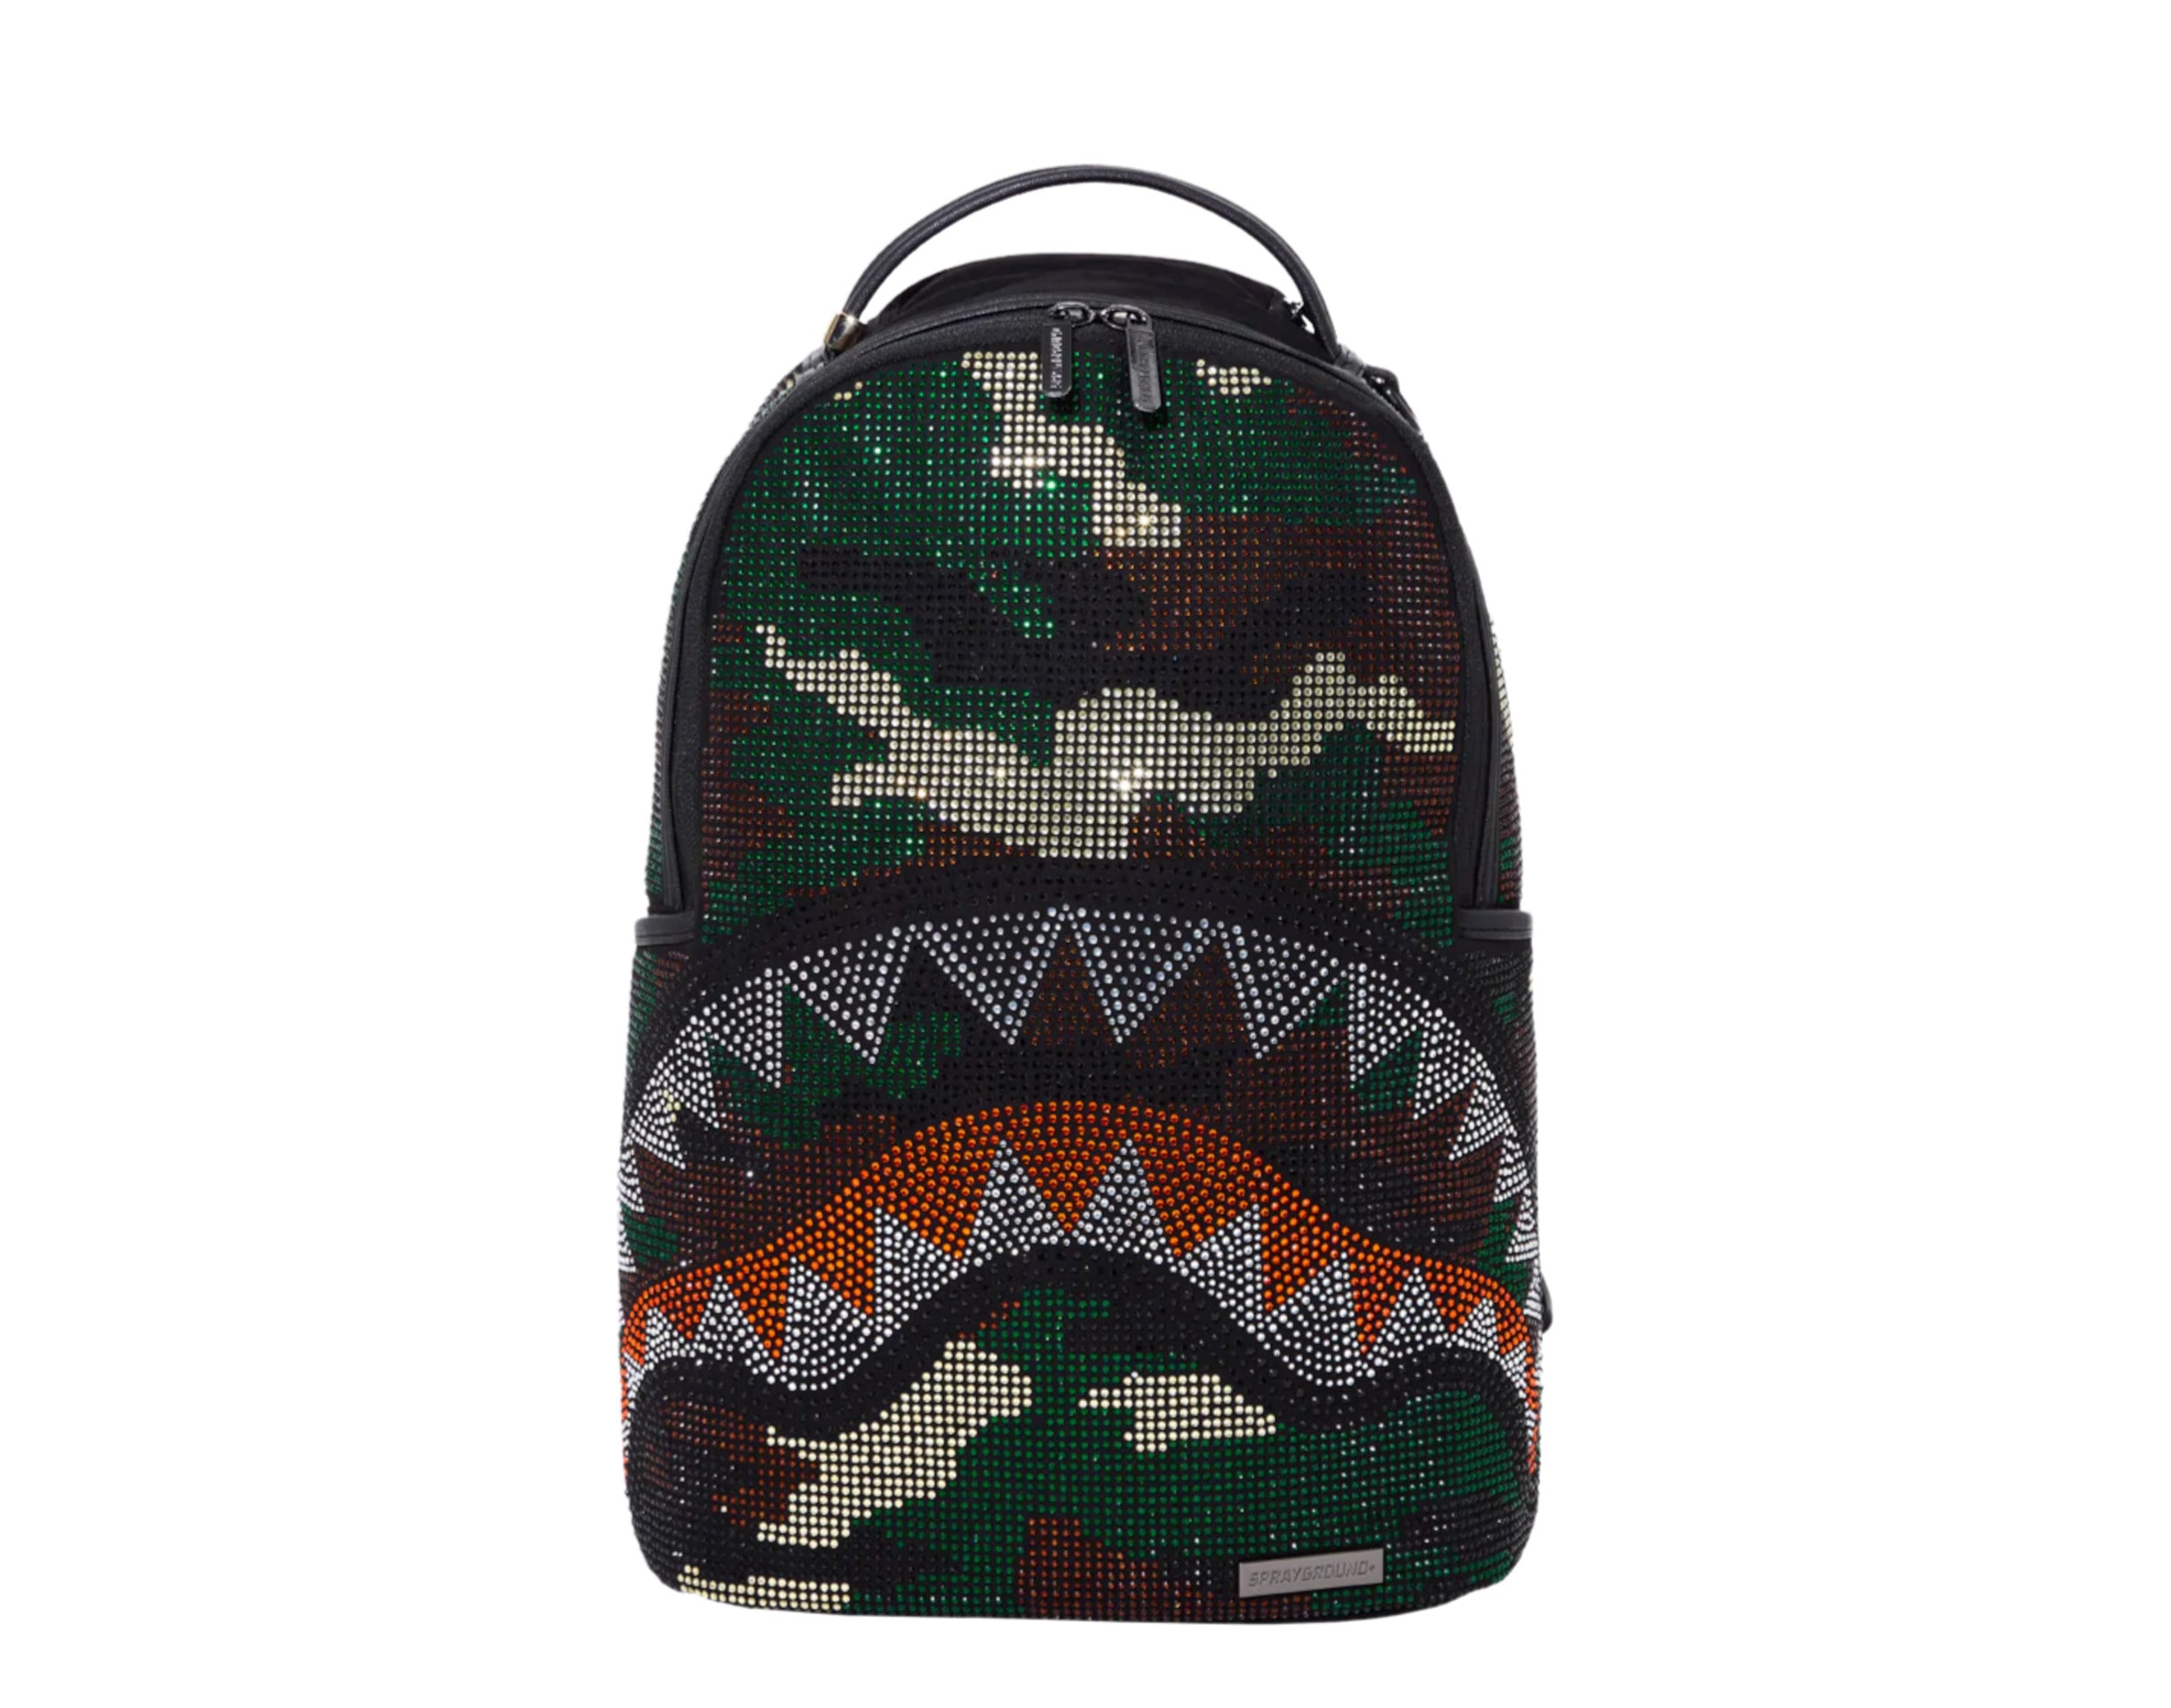 Stay ground Limited Edition Camo Drip Shark Backpack Rare Bag!